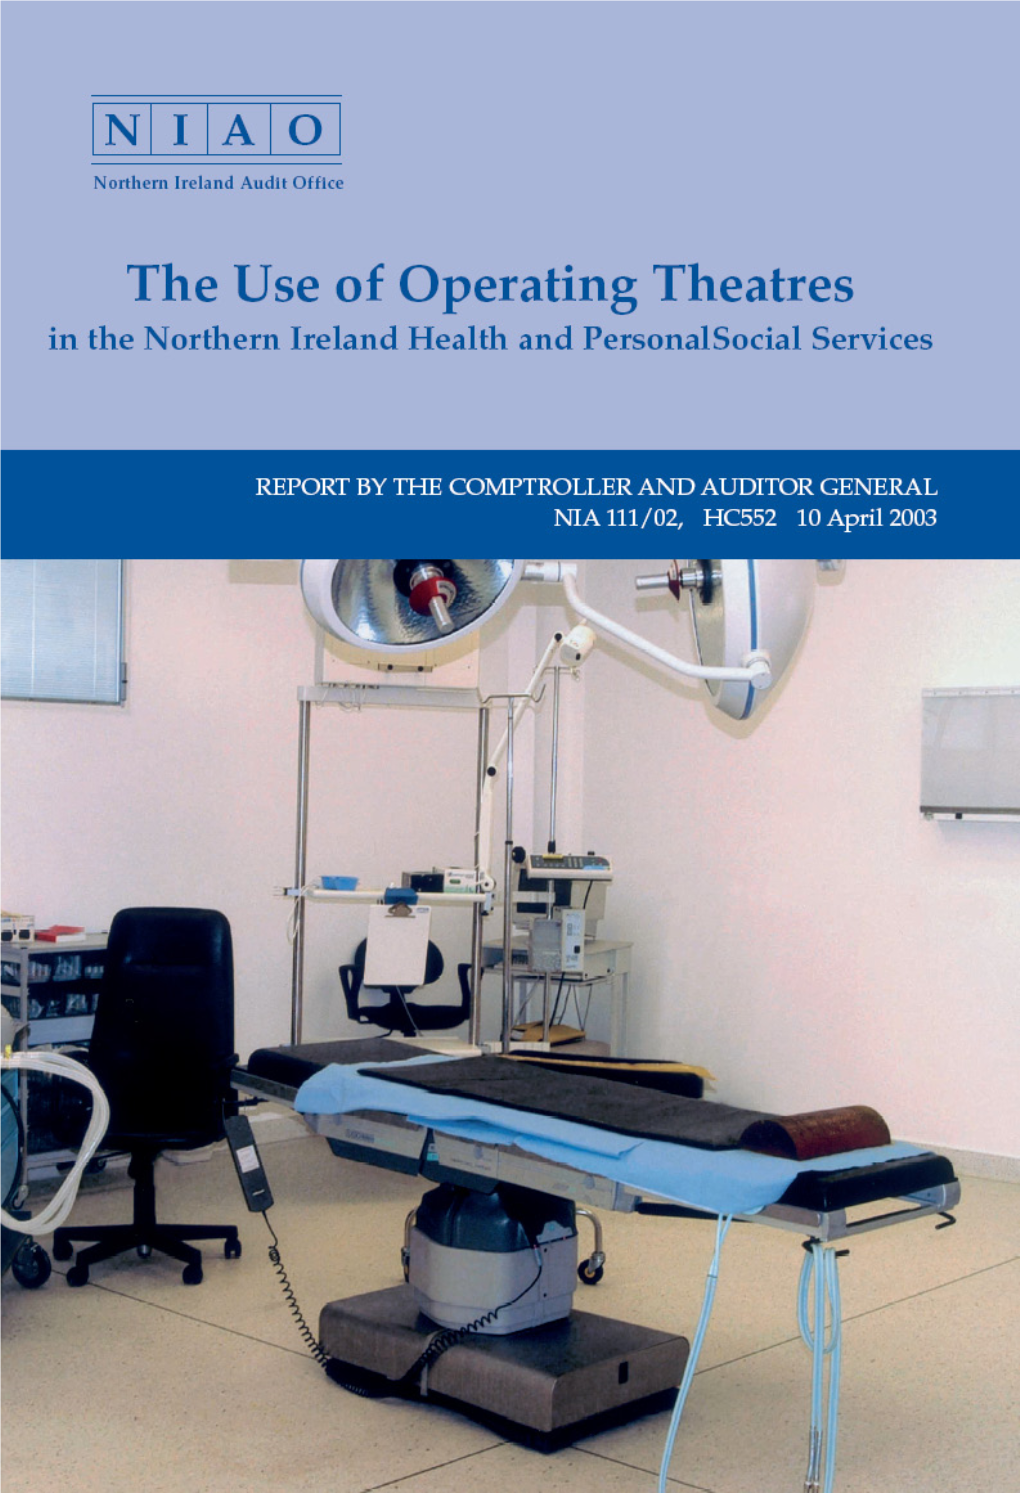 The Use of Operating Theatres in the Northern Ireland Health and Personal Social Services